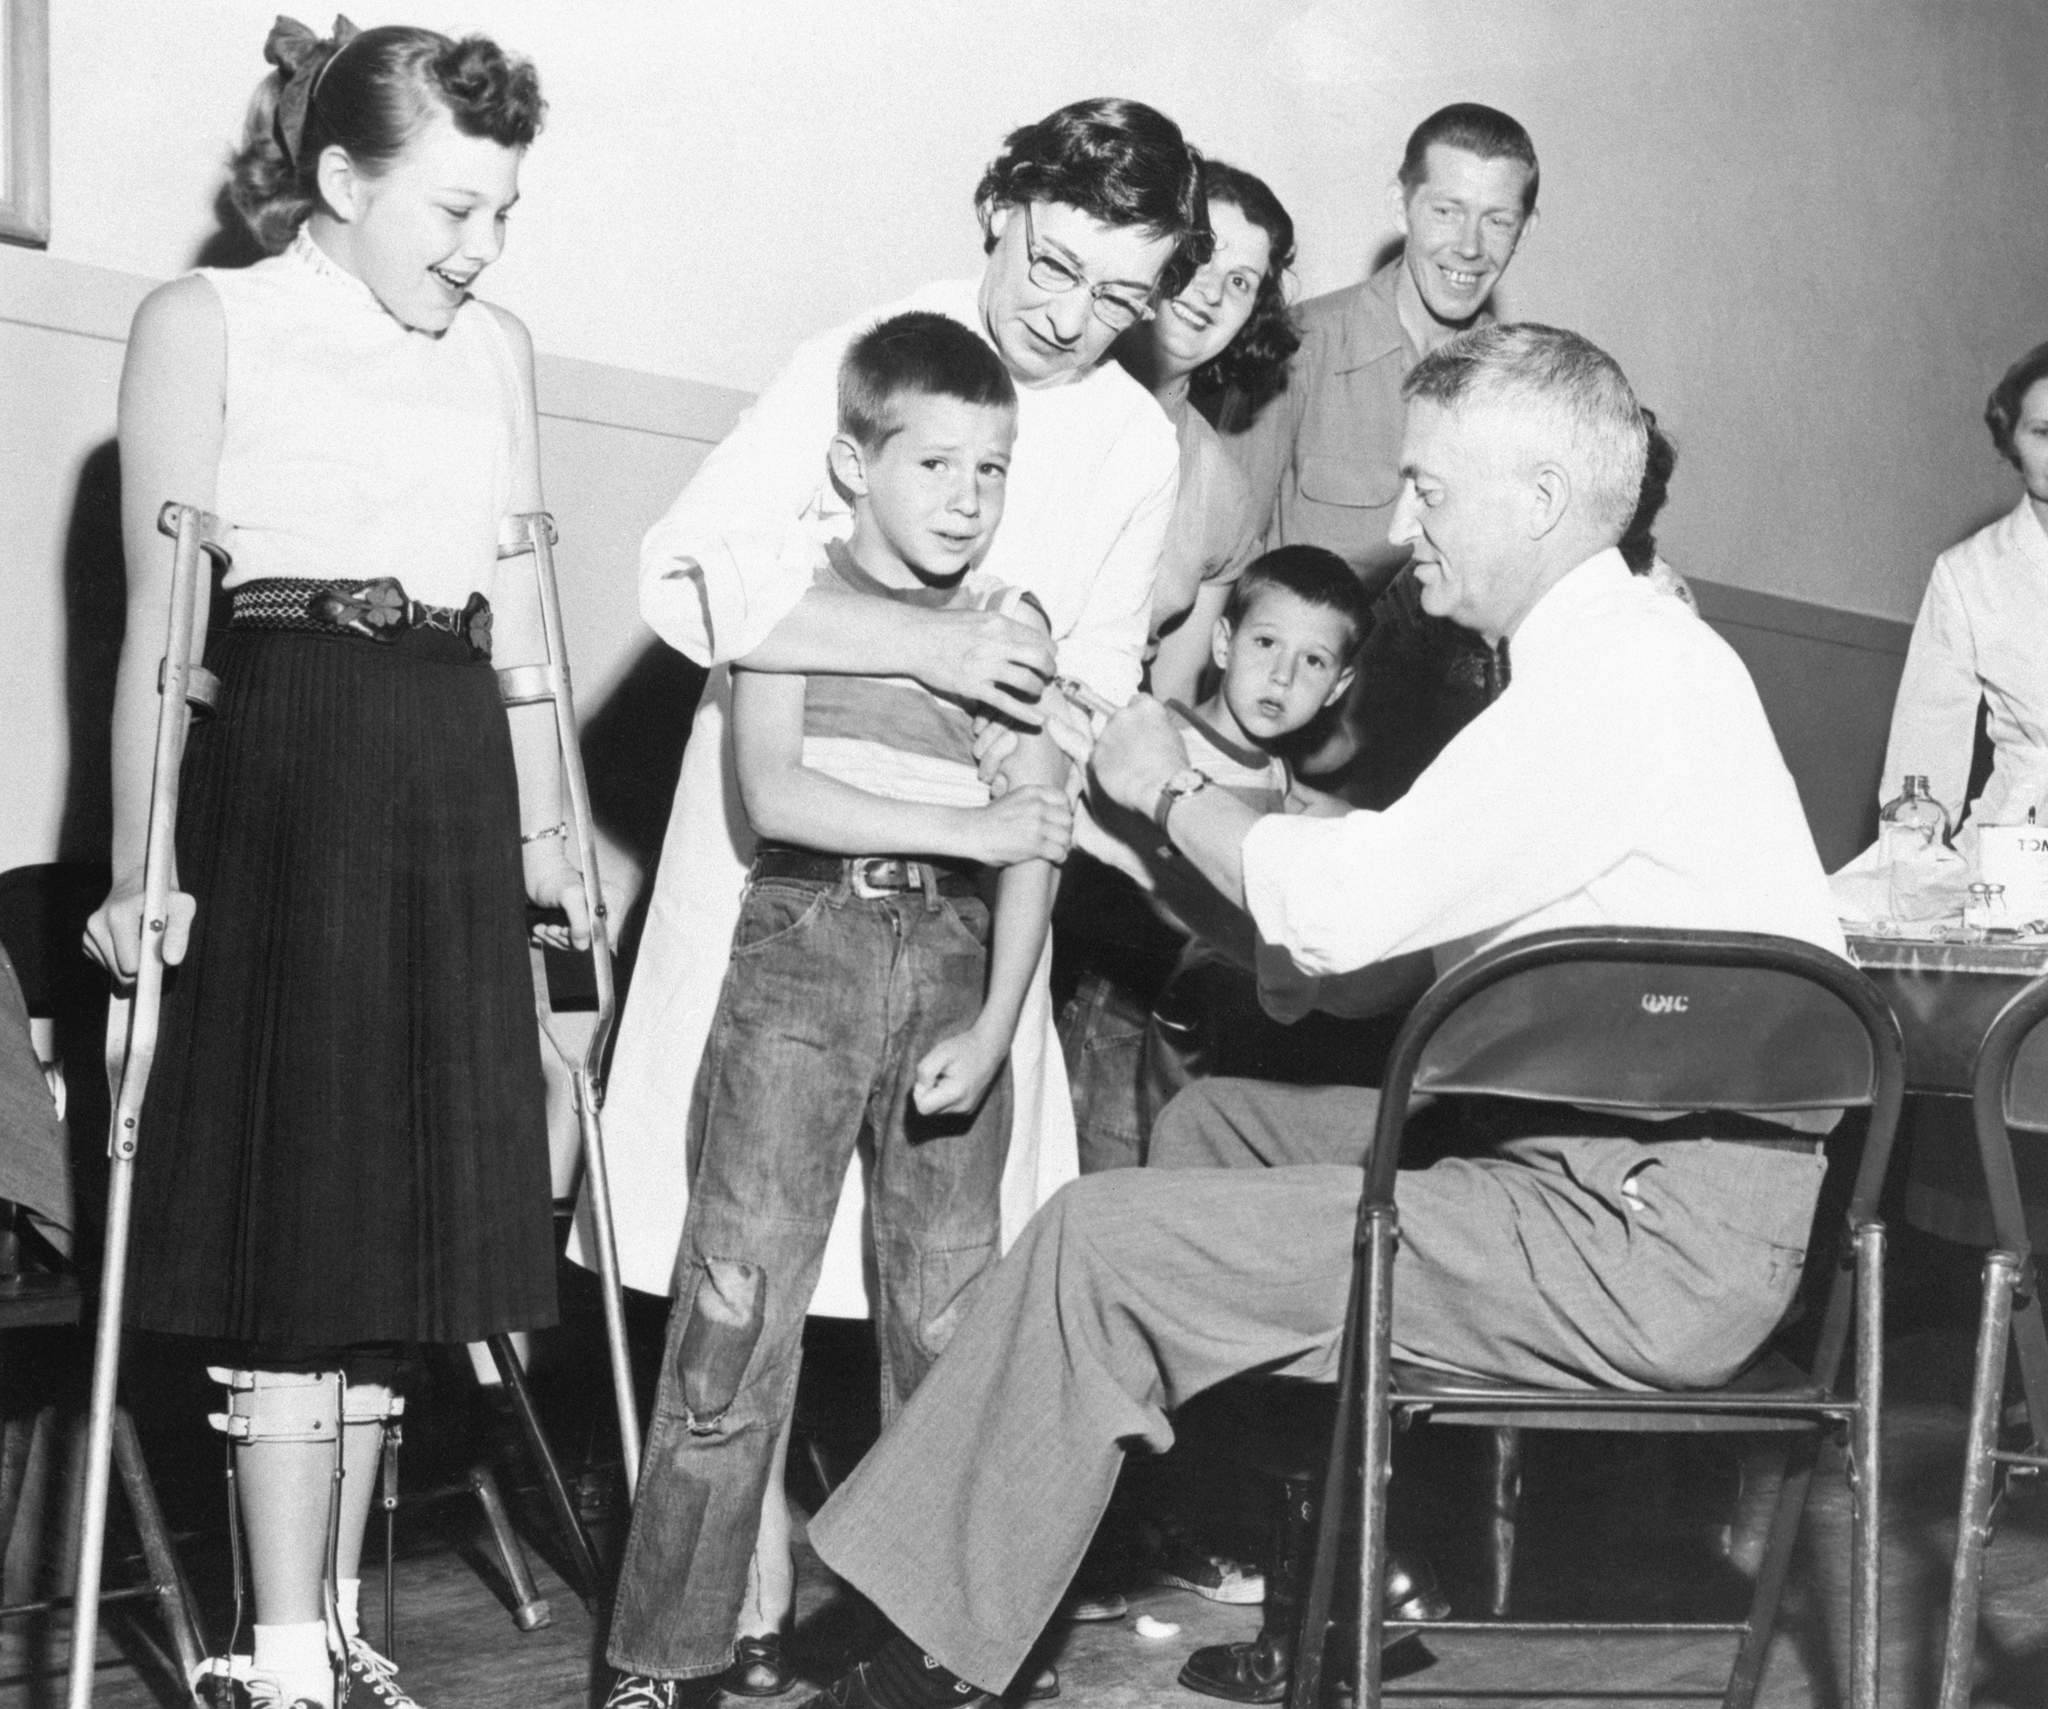 Now and then: As the country embraces COVID-19 vaccines, a look back on the age of polio